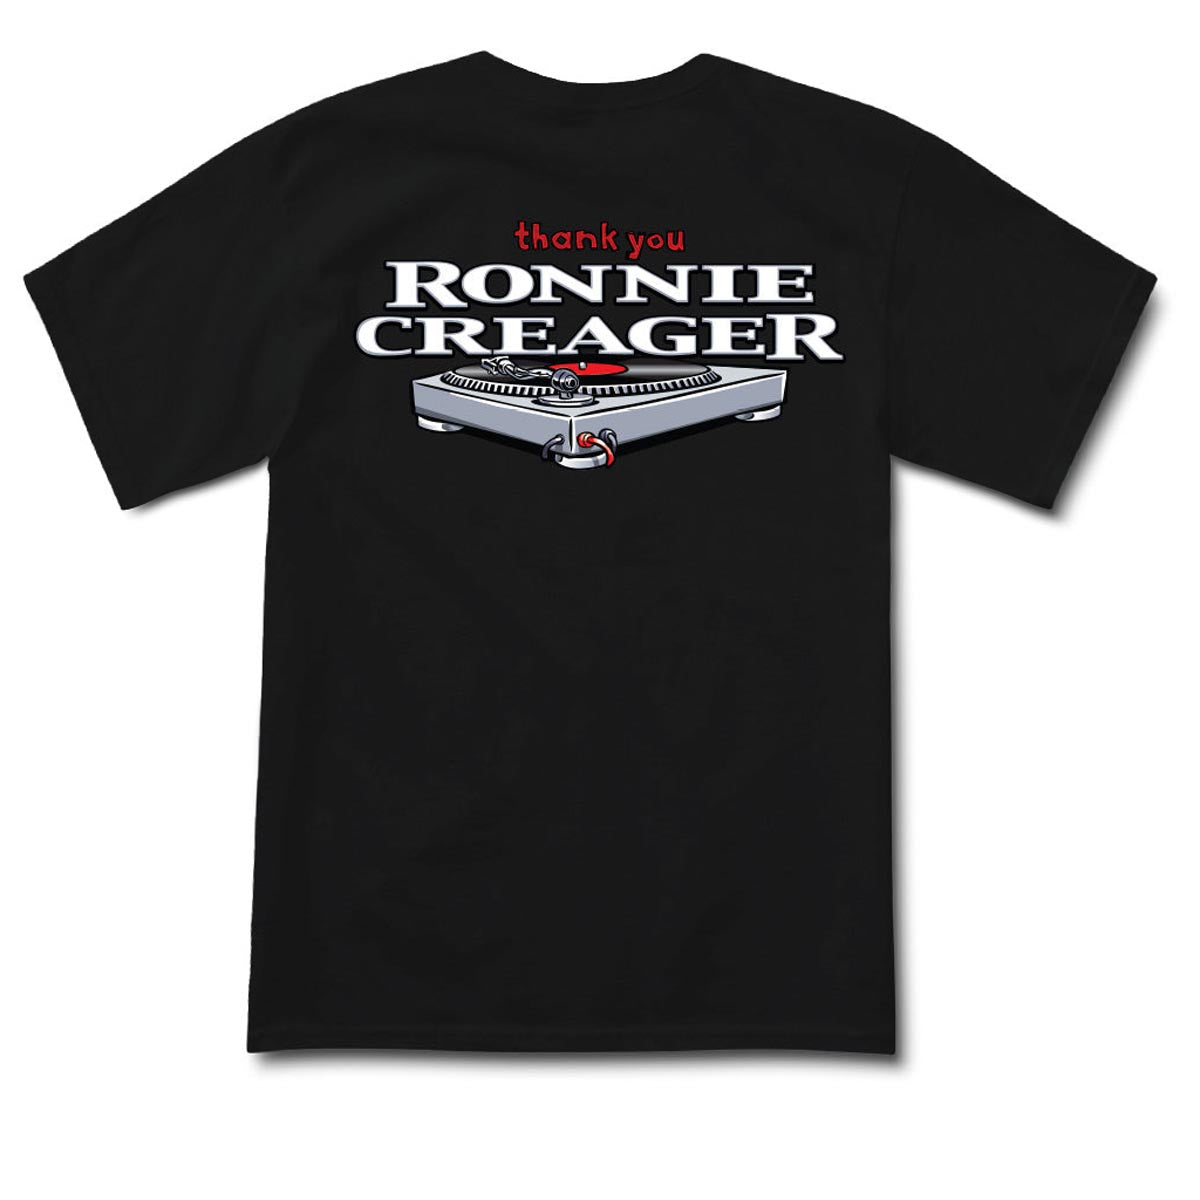 Thank You x Ronnie Creager Turntable T-Shirt - Black image 1